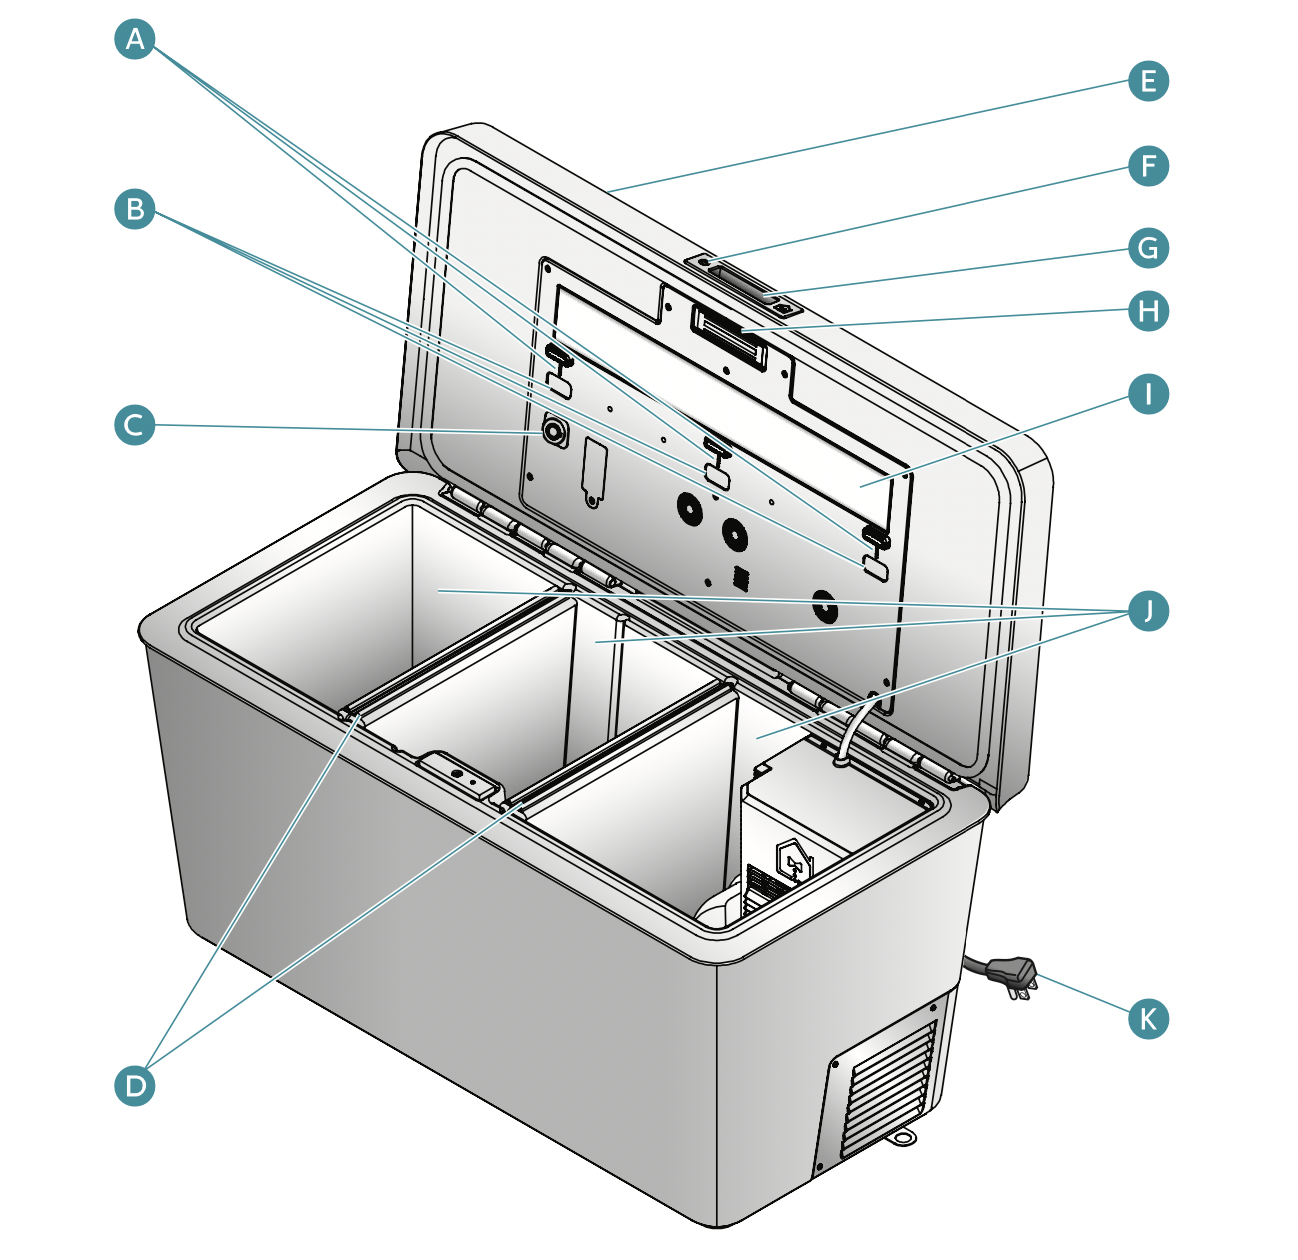 Smart Box diagram labeled with letters